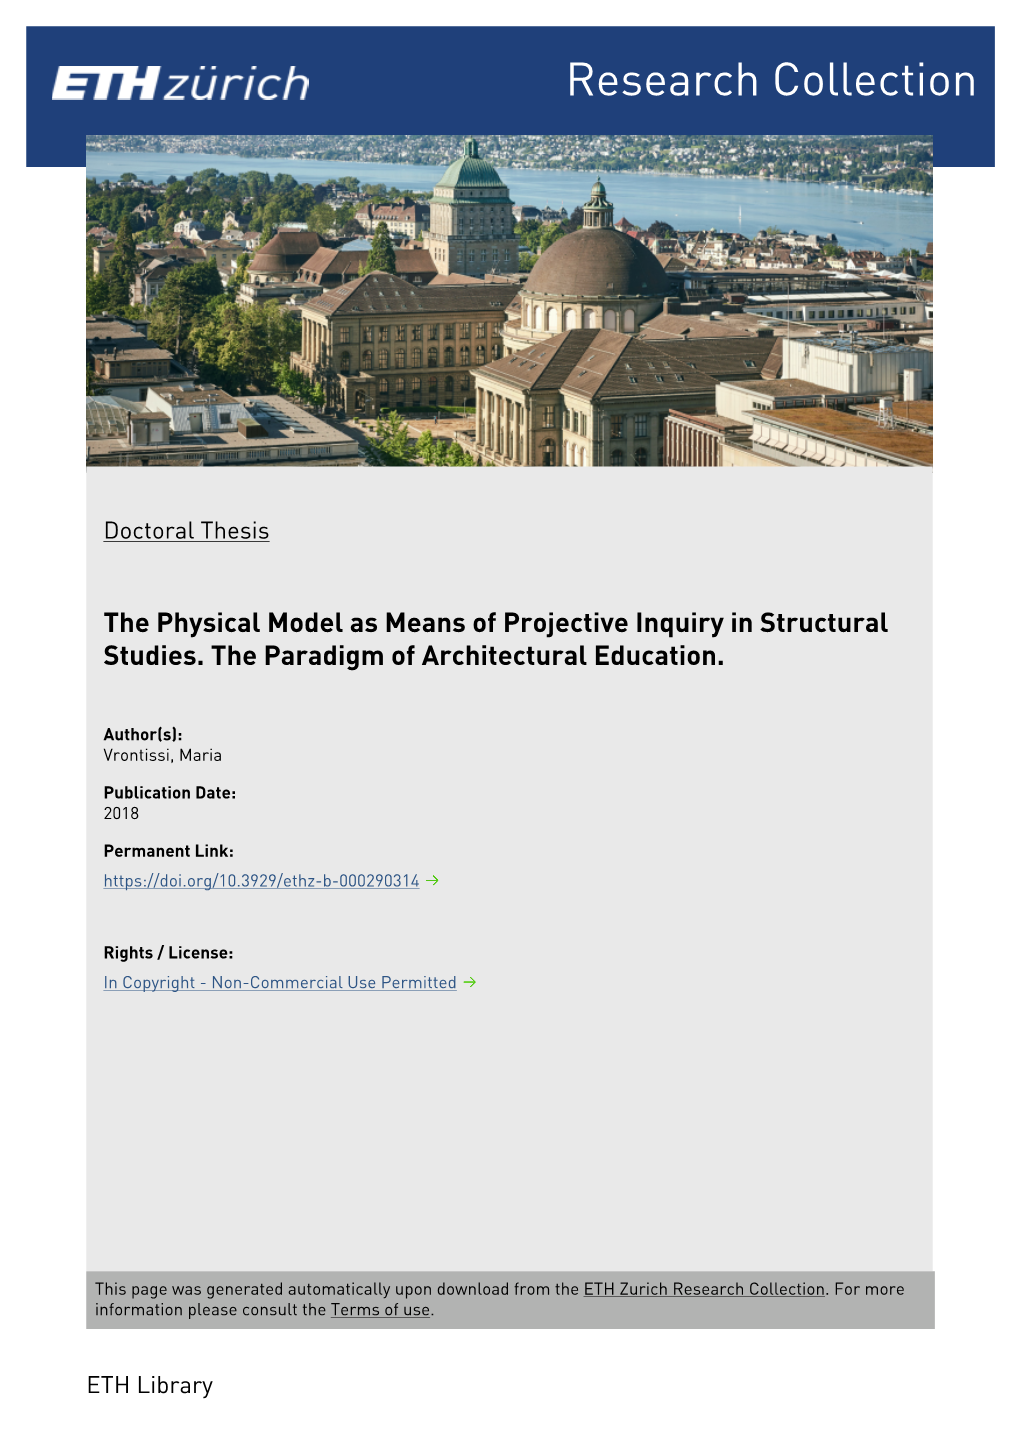 The Physical Model As Means of Projective Inquiry in Structural Studies. the Paradigm of Architectural Education